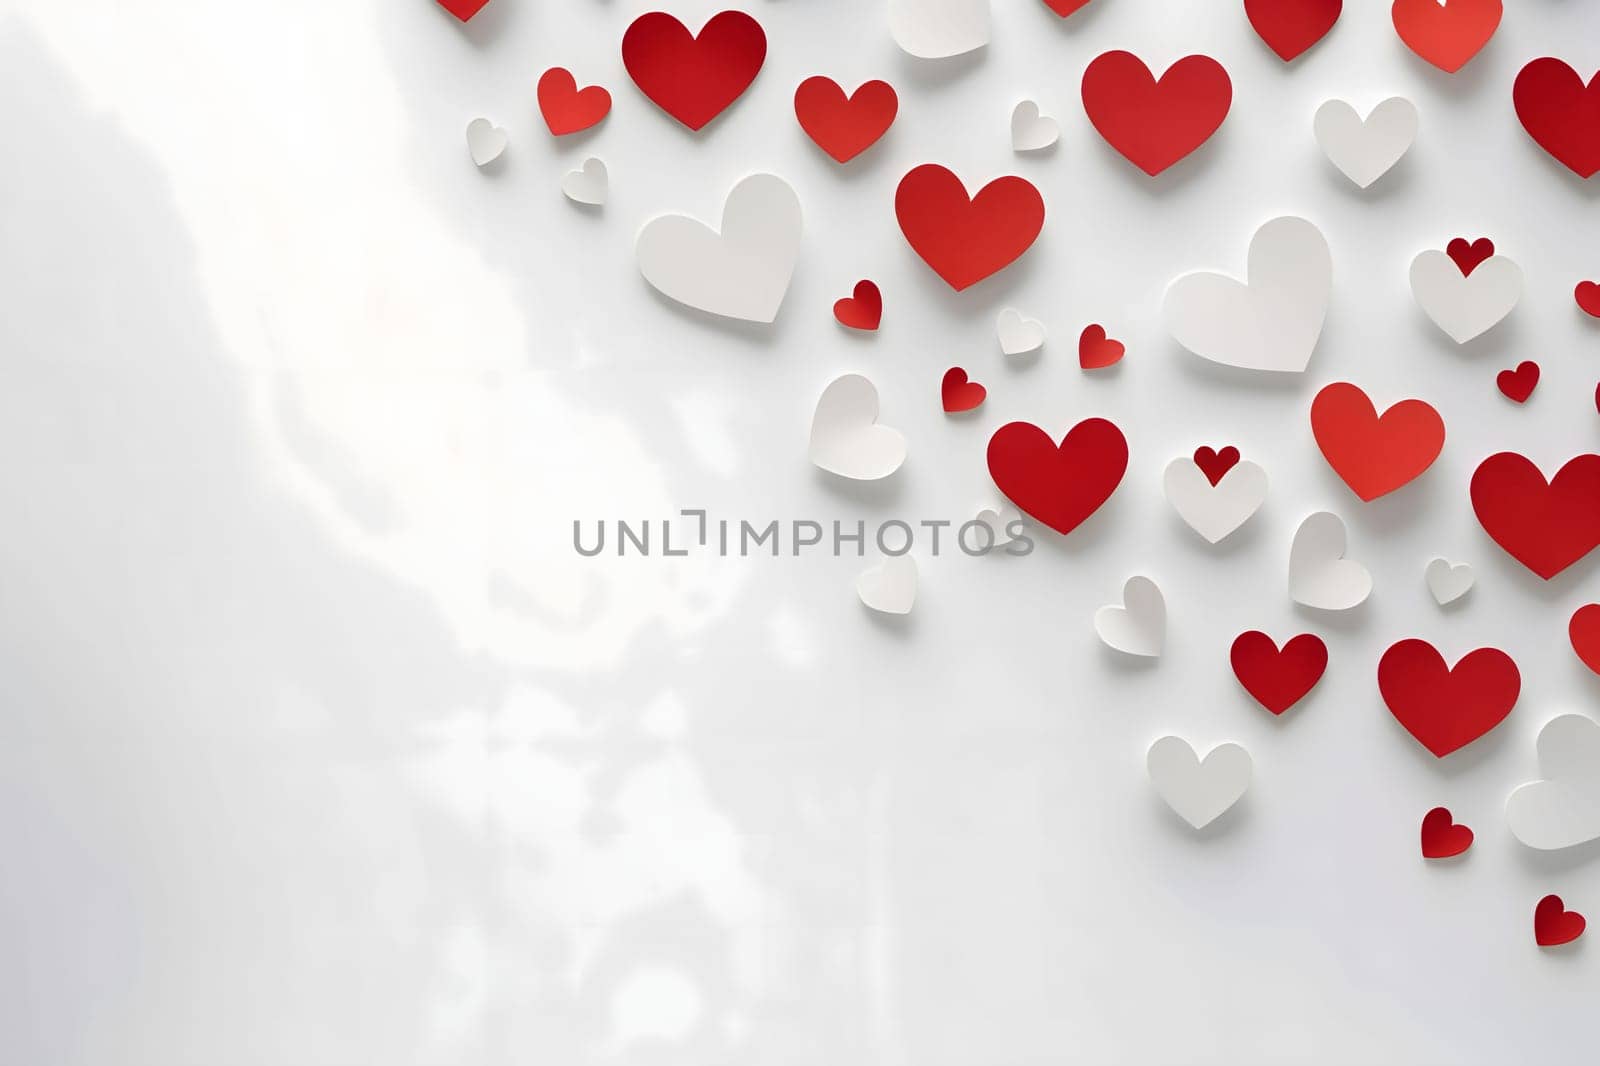 White and red hearts on a blank light card, banner with space for your own content. Heart as a symbol of affection and love. The time of falling in love and love.